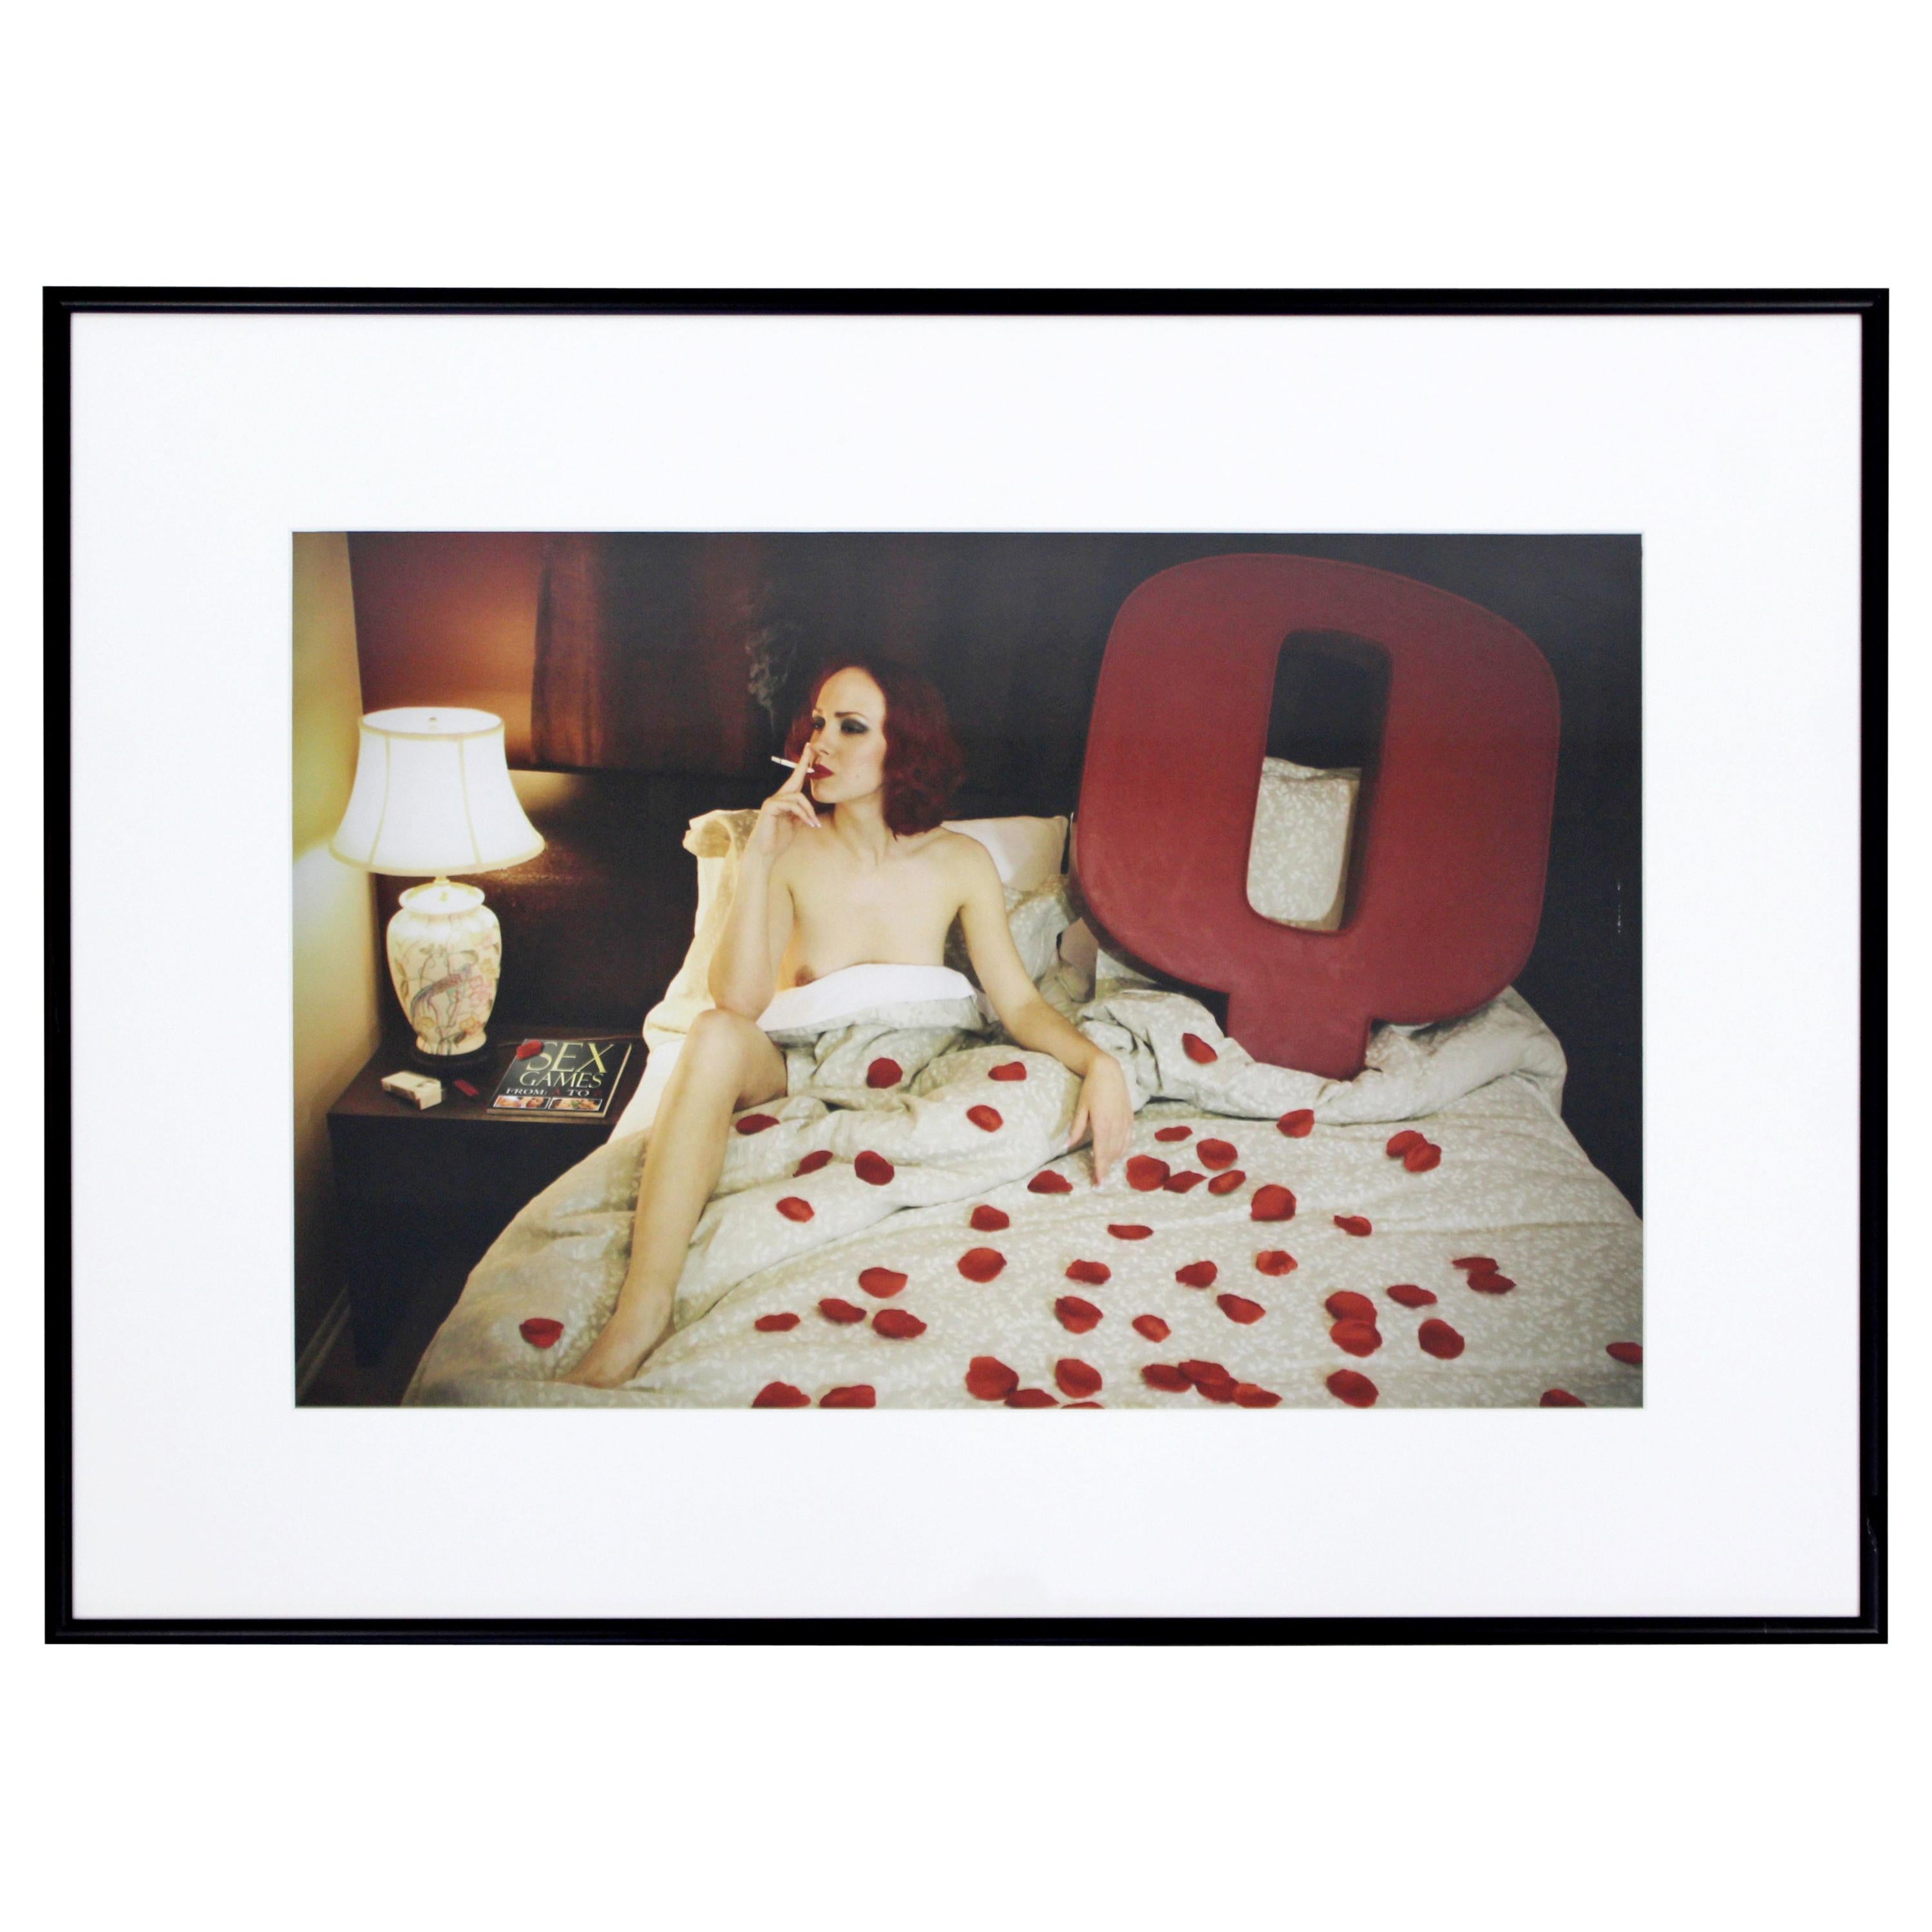 Contemporary Framed Photo Print by A. Owen Layne Sex Games Nude Woman 5/25